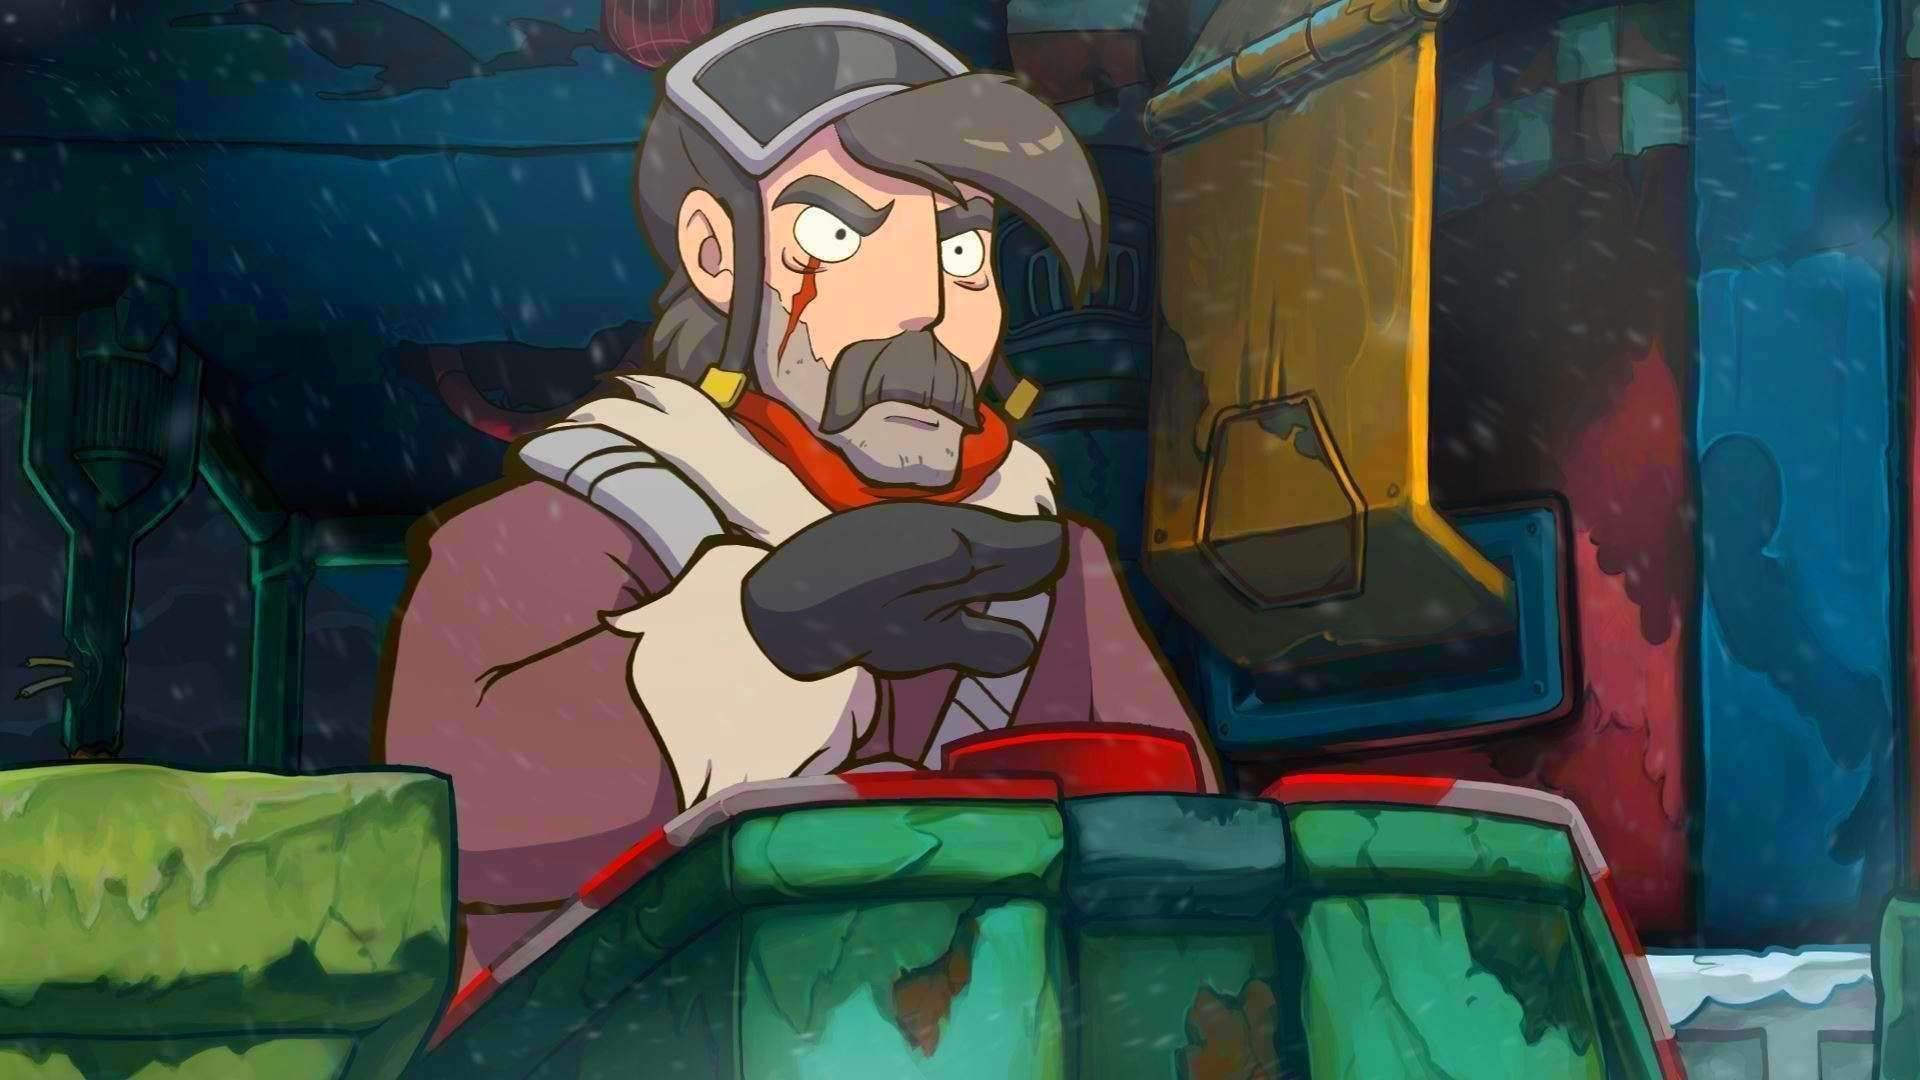 Screenshot from Deponia Doomsday (1/7)